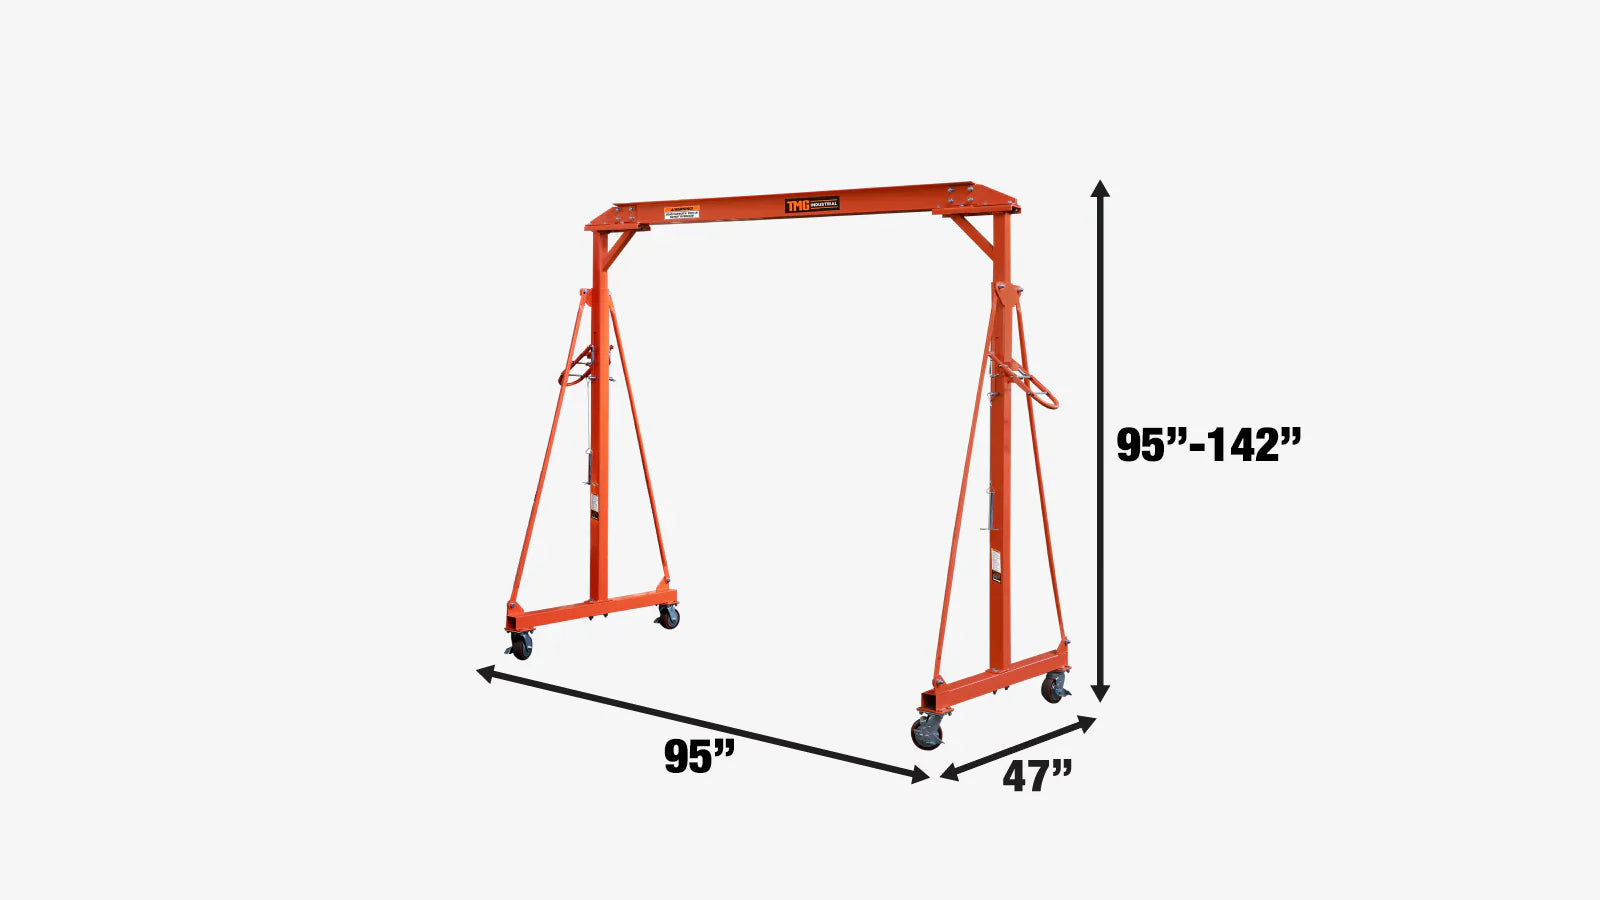 TMG Industrial 2200-lb Adjustable Height All-Steel Gantry Crane, Auto-Lock, 95” Min. Height, 142” Max. Height, Locking Swivel Casters, TMG-AGC11(Previously TMG-AGC10)-specifications-image